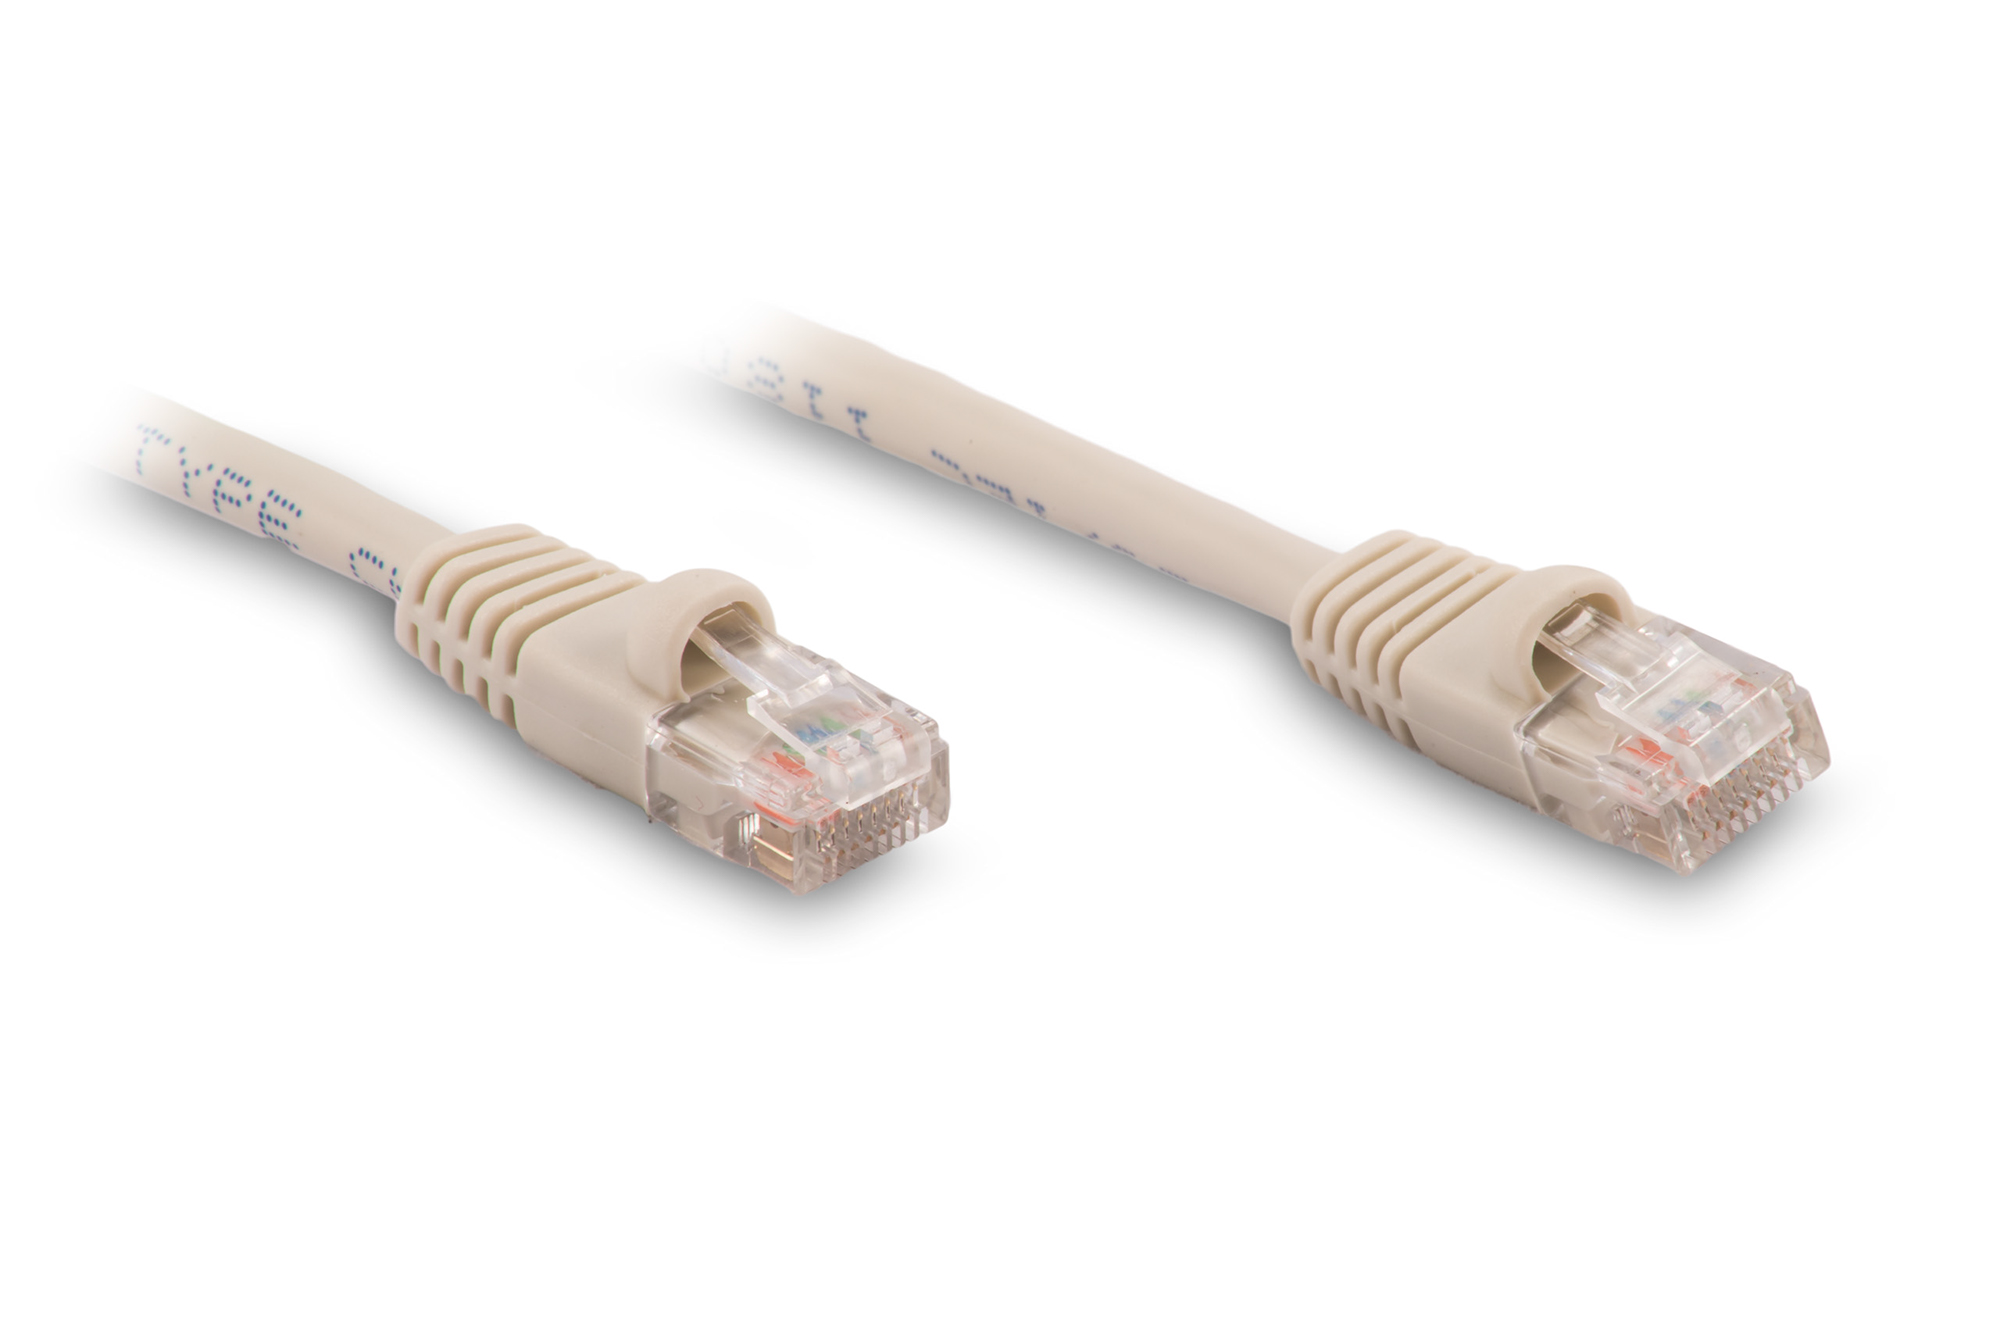 10ft Cat5e Ethernet Patch Cable - Gray Color - Snagless Boot, Stranded, RJ45, 350Mhz, 24AWG